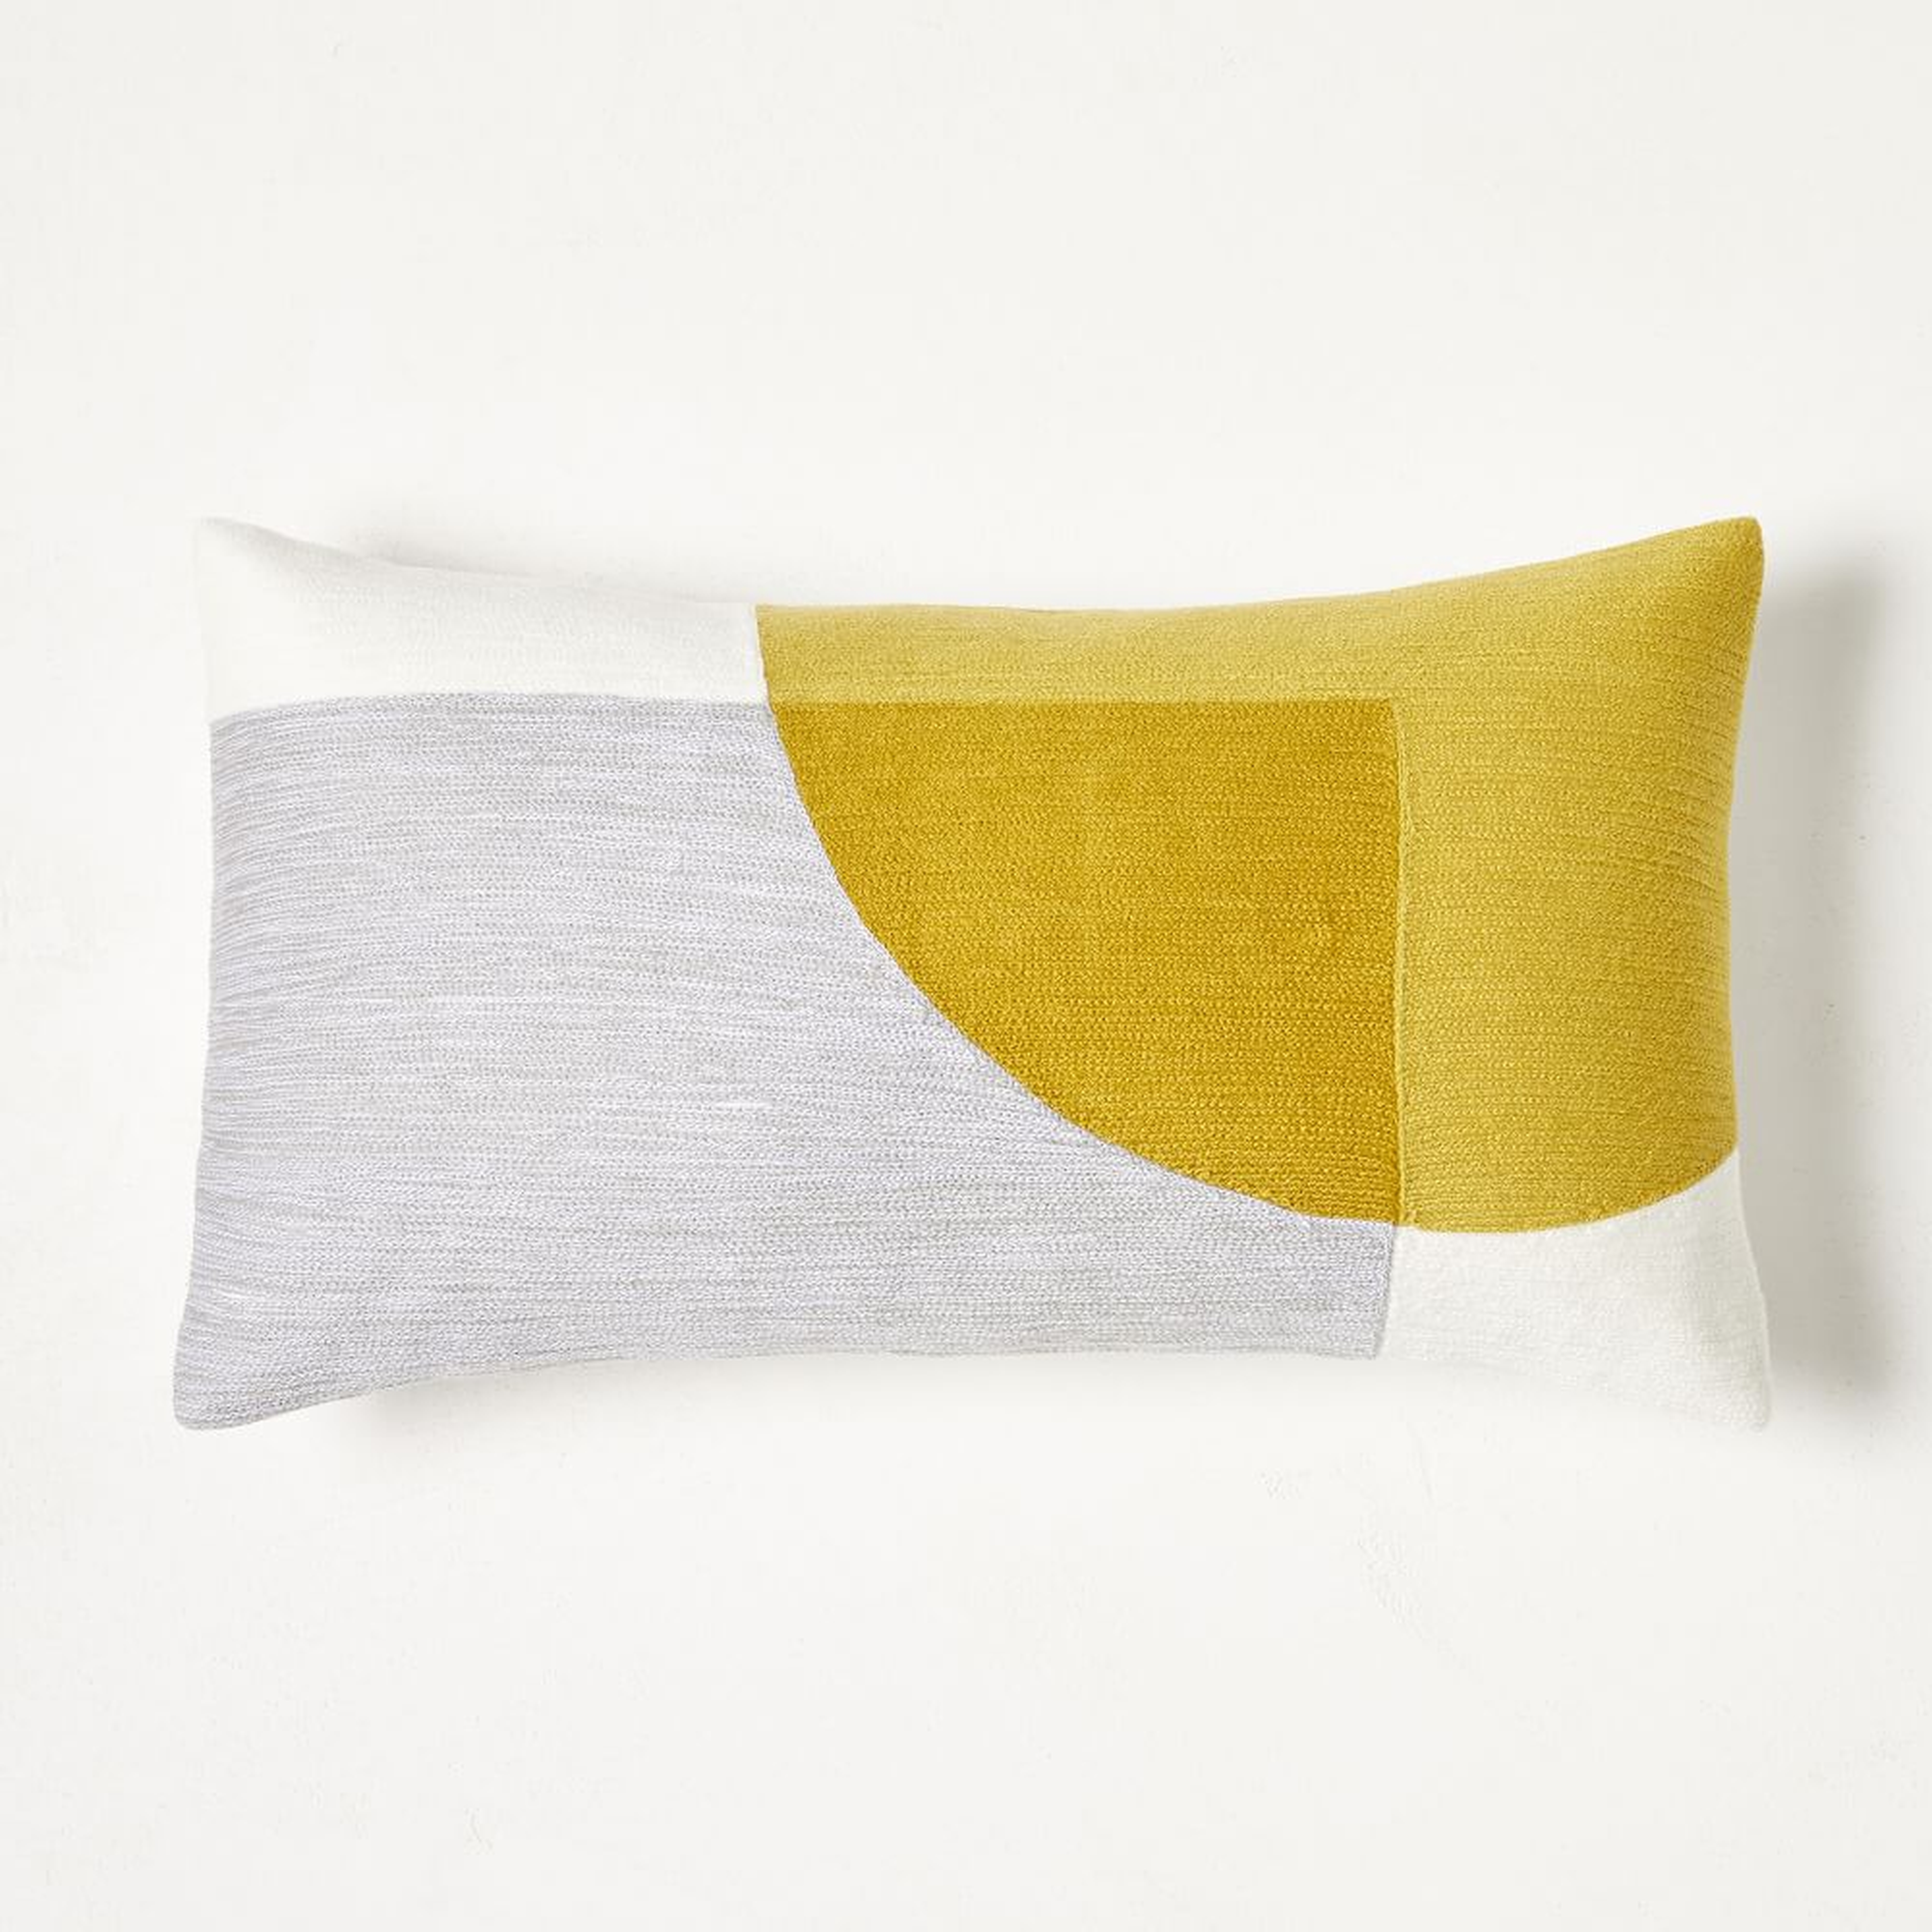 Crewel Overlapping Shapes Pillow Cover, 12"x21", Pearl Gray - West Elm